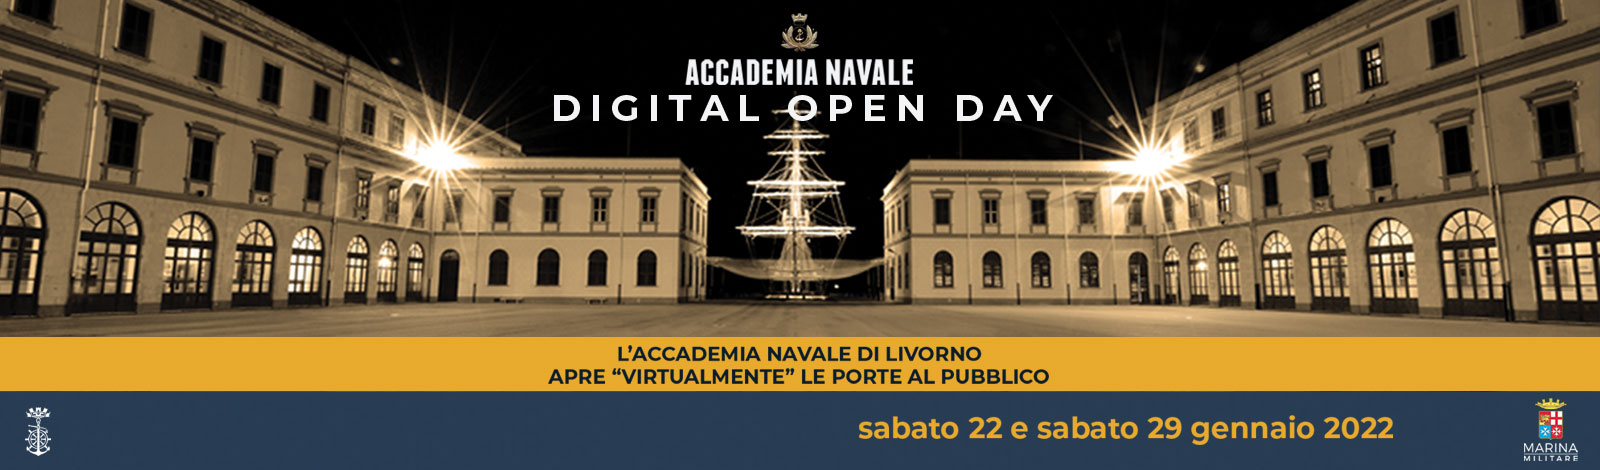 open day accademia 1600 470